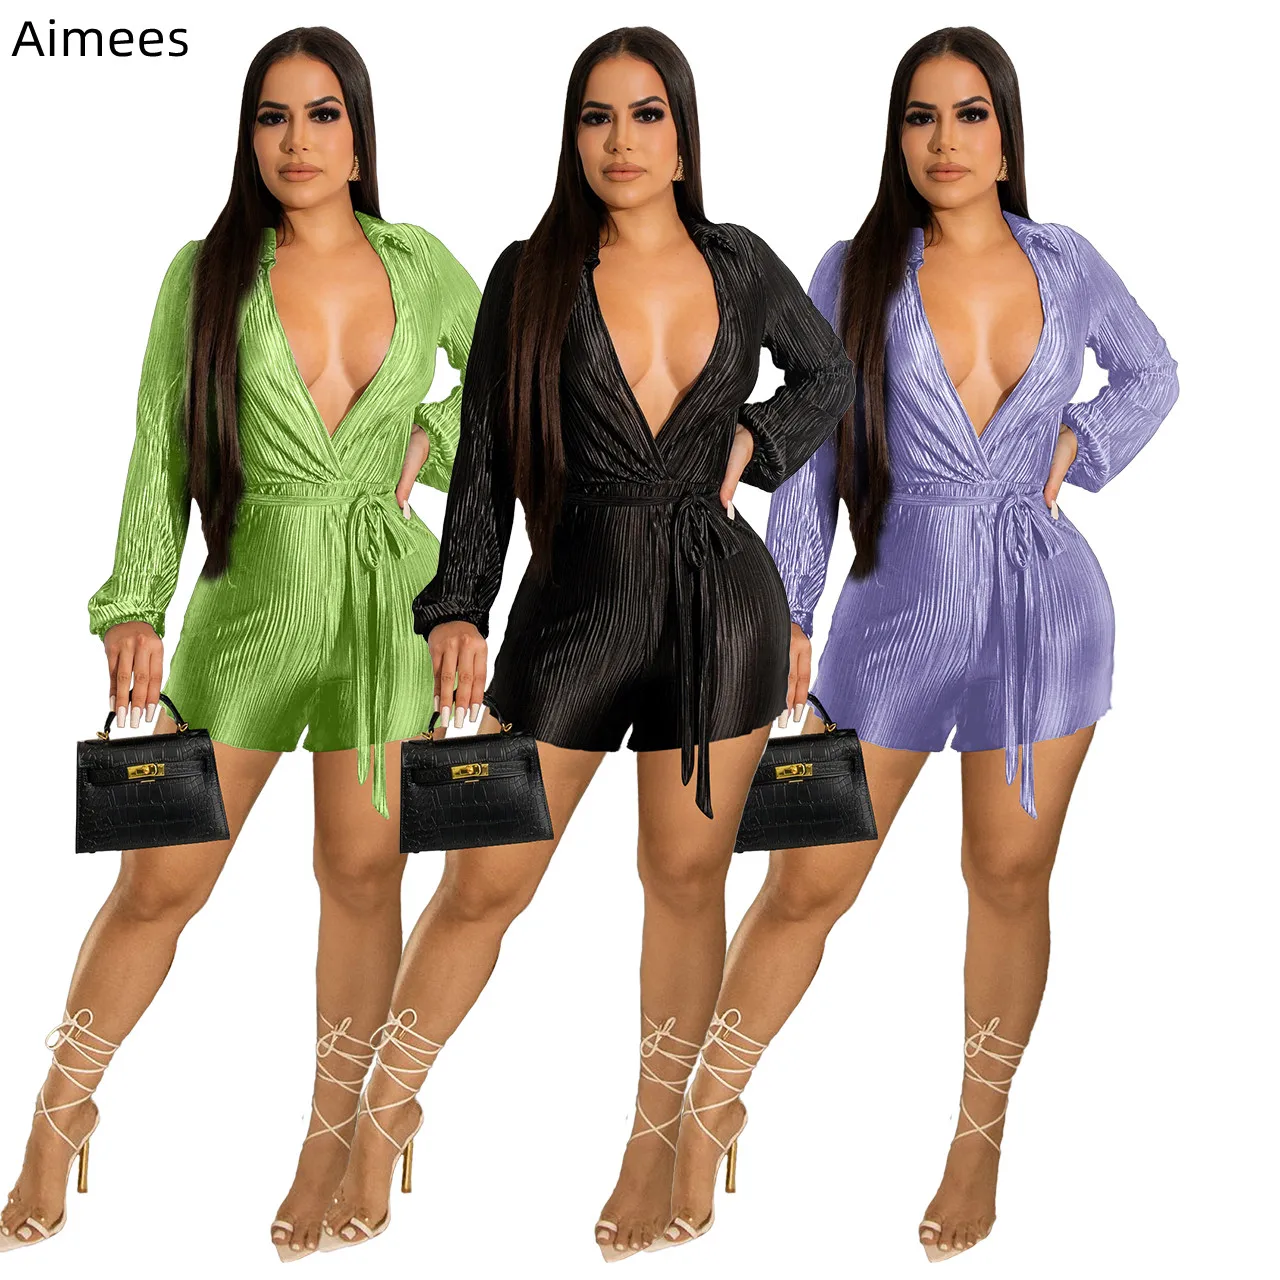 

Sexy Deep V Neck Woman Bodysuit Chic Pleats Long Sleeves Shorts Casual Jumpsuit Autumn Party Rompers with Sash Drop Shipping